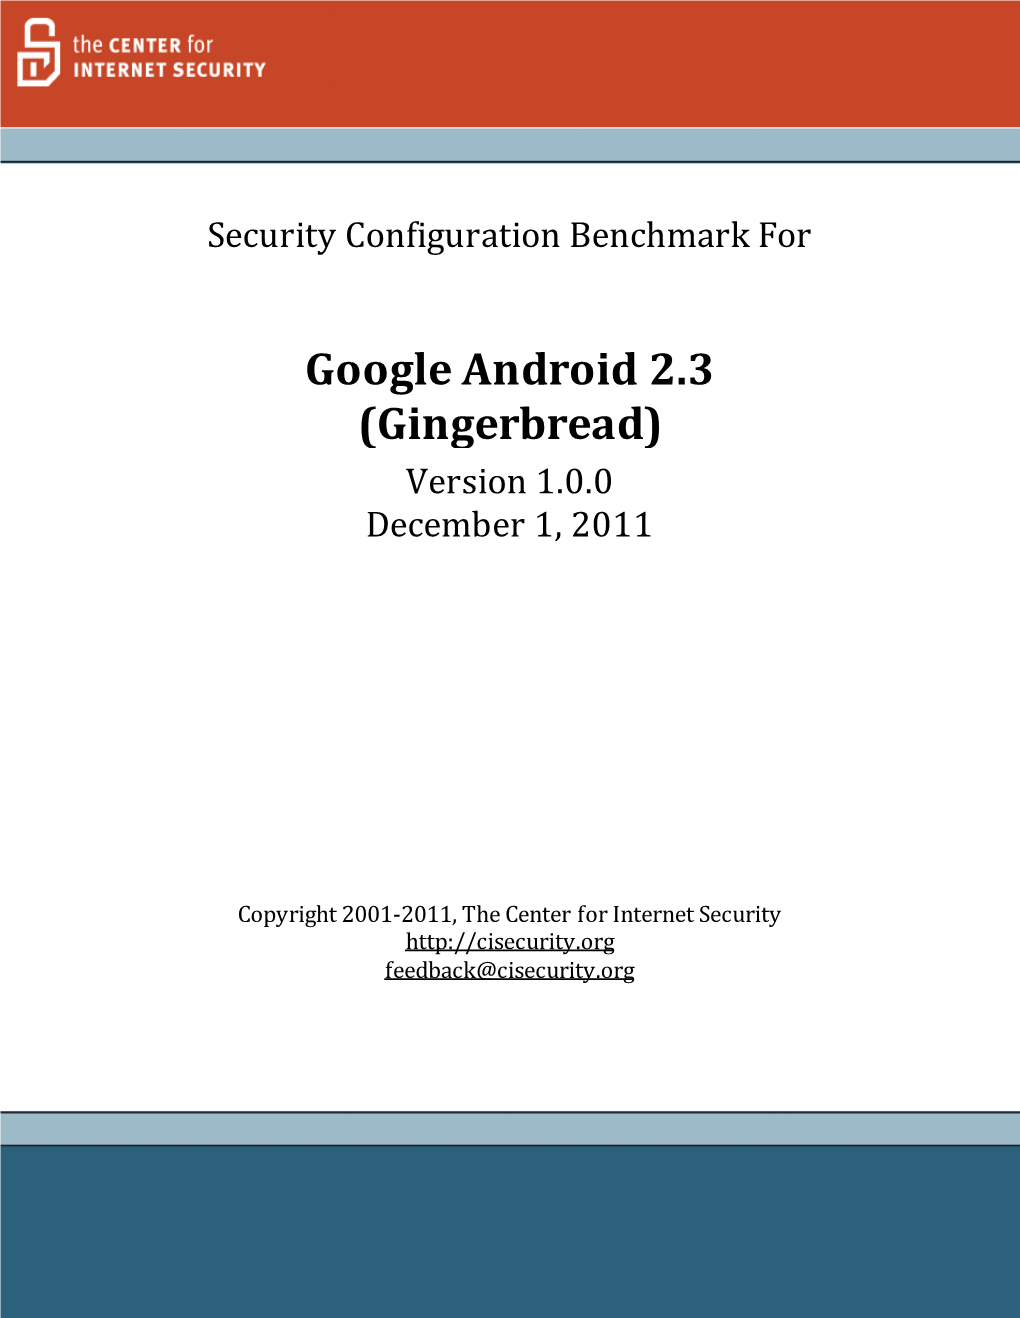 Google Android 2.3 (Gingerbread) Version 1.0.0 December 1, 2011